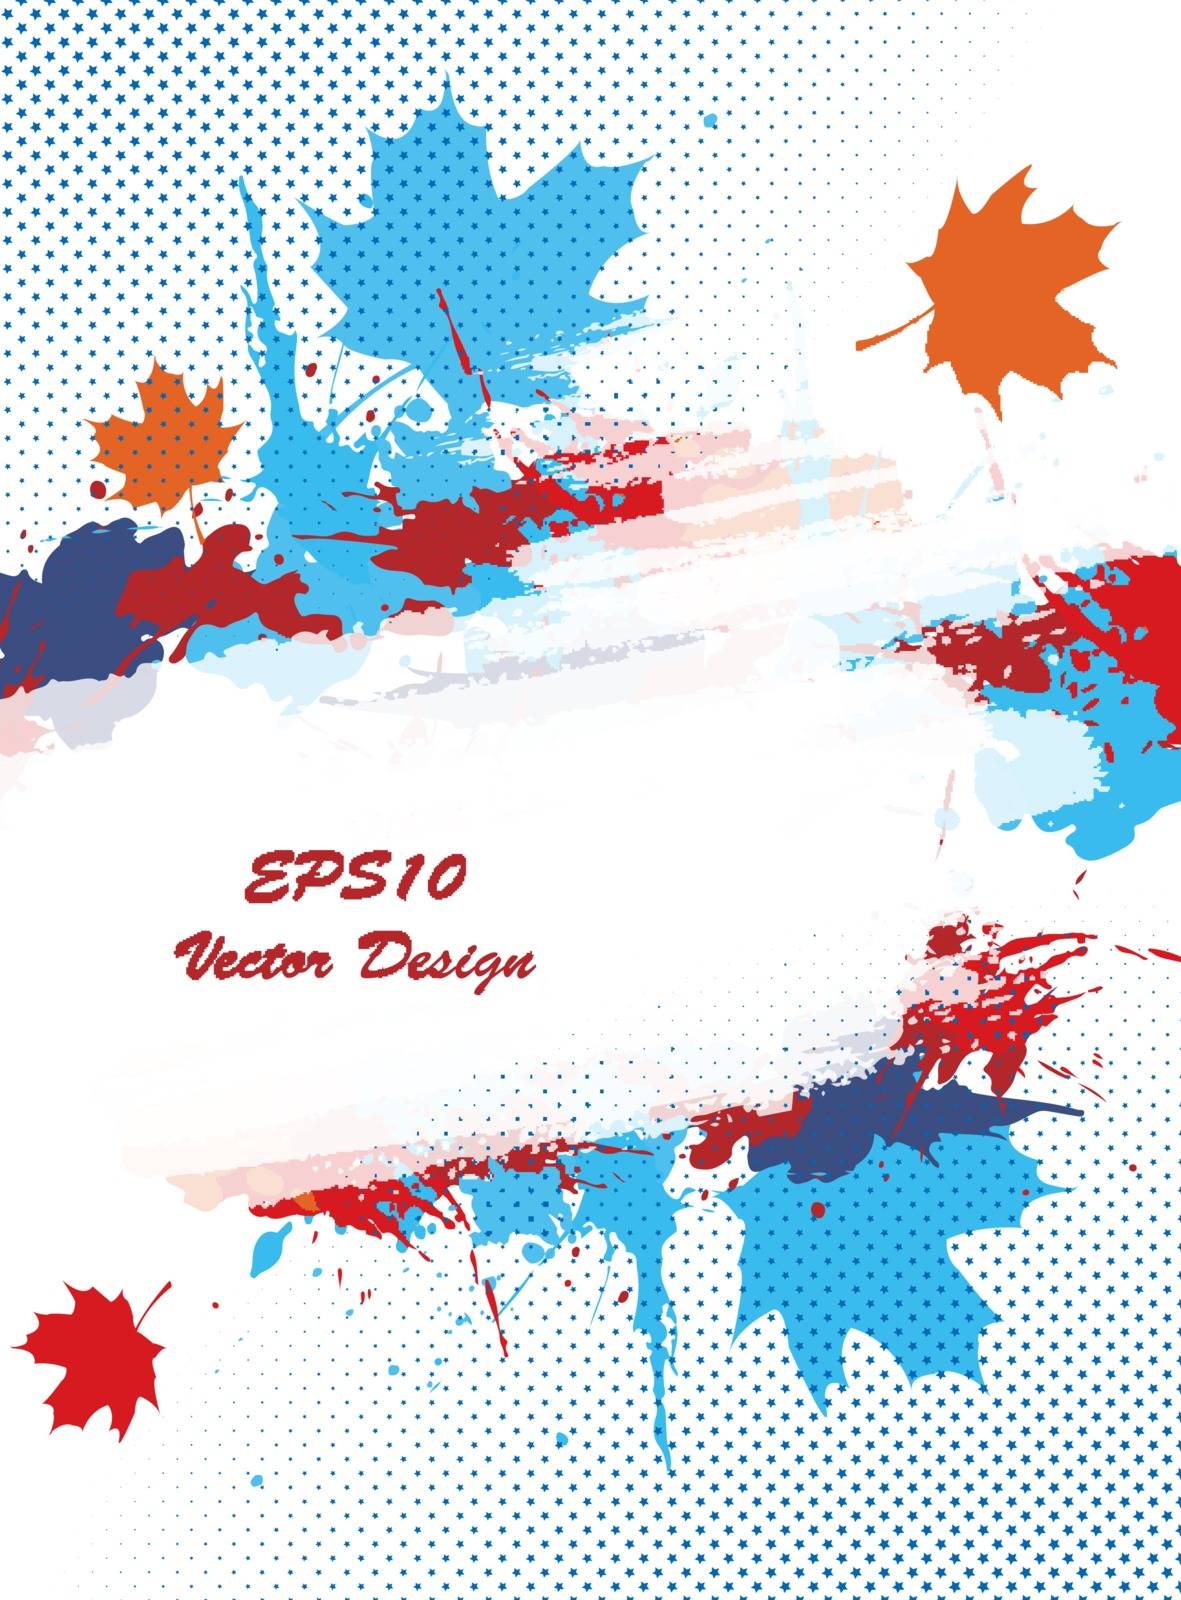 bright grungy background. Colorful autumn template. Texture and elements for design. Eps10